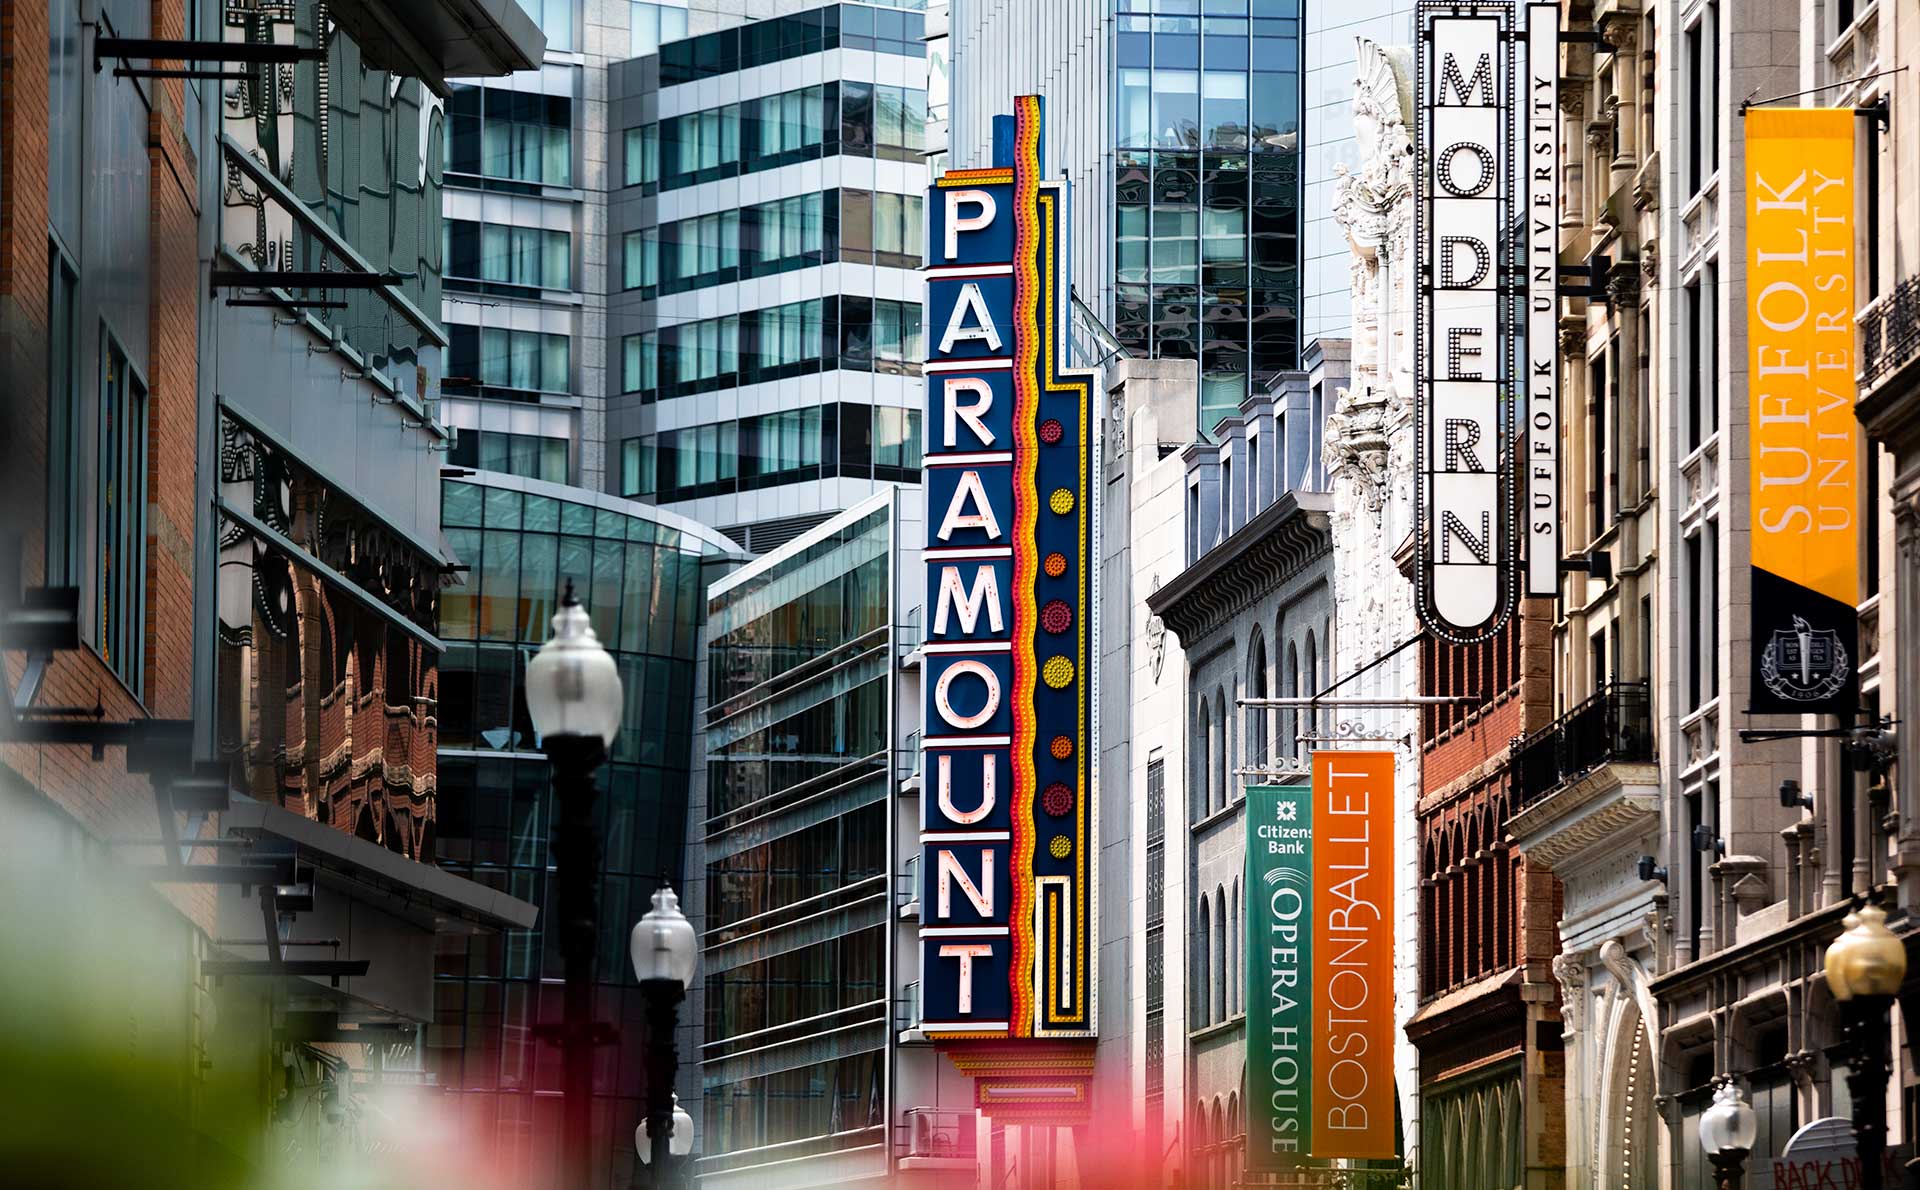 Exterior image of The Paramount in Boston Theater District